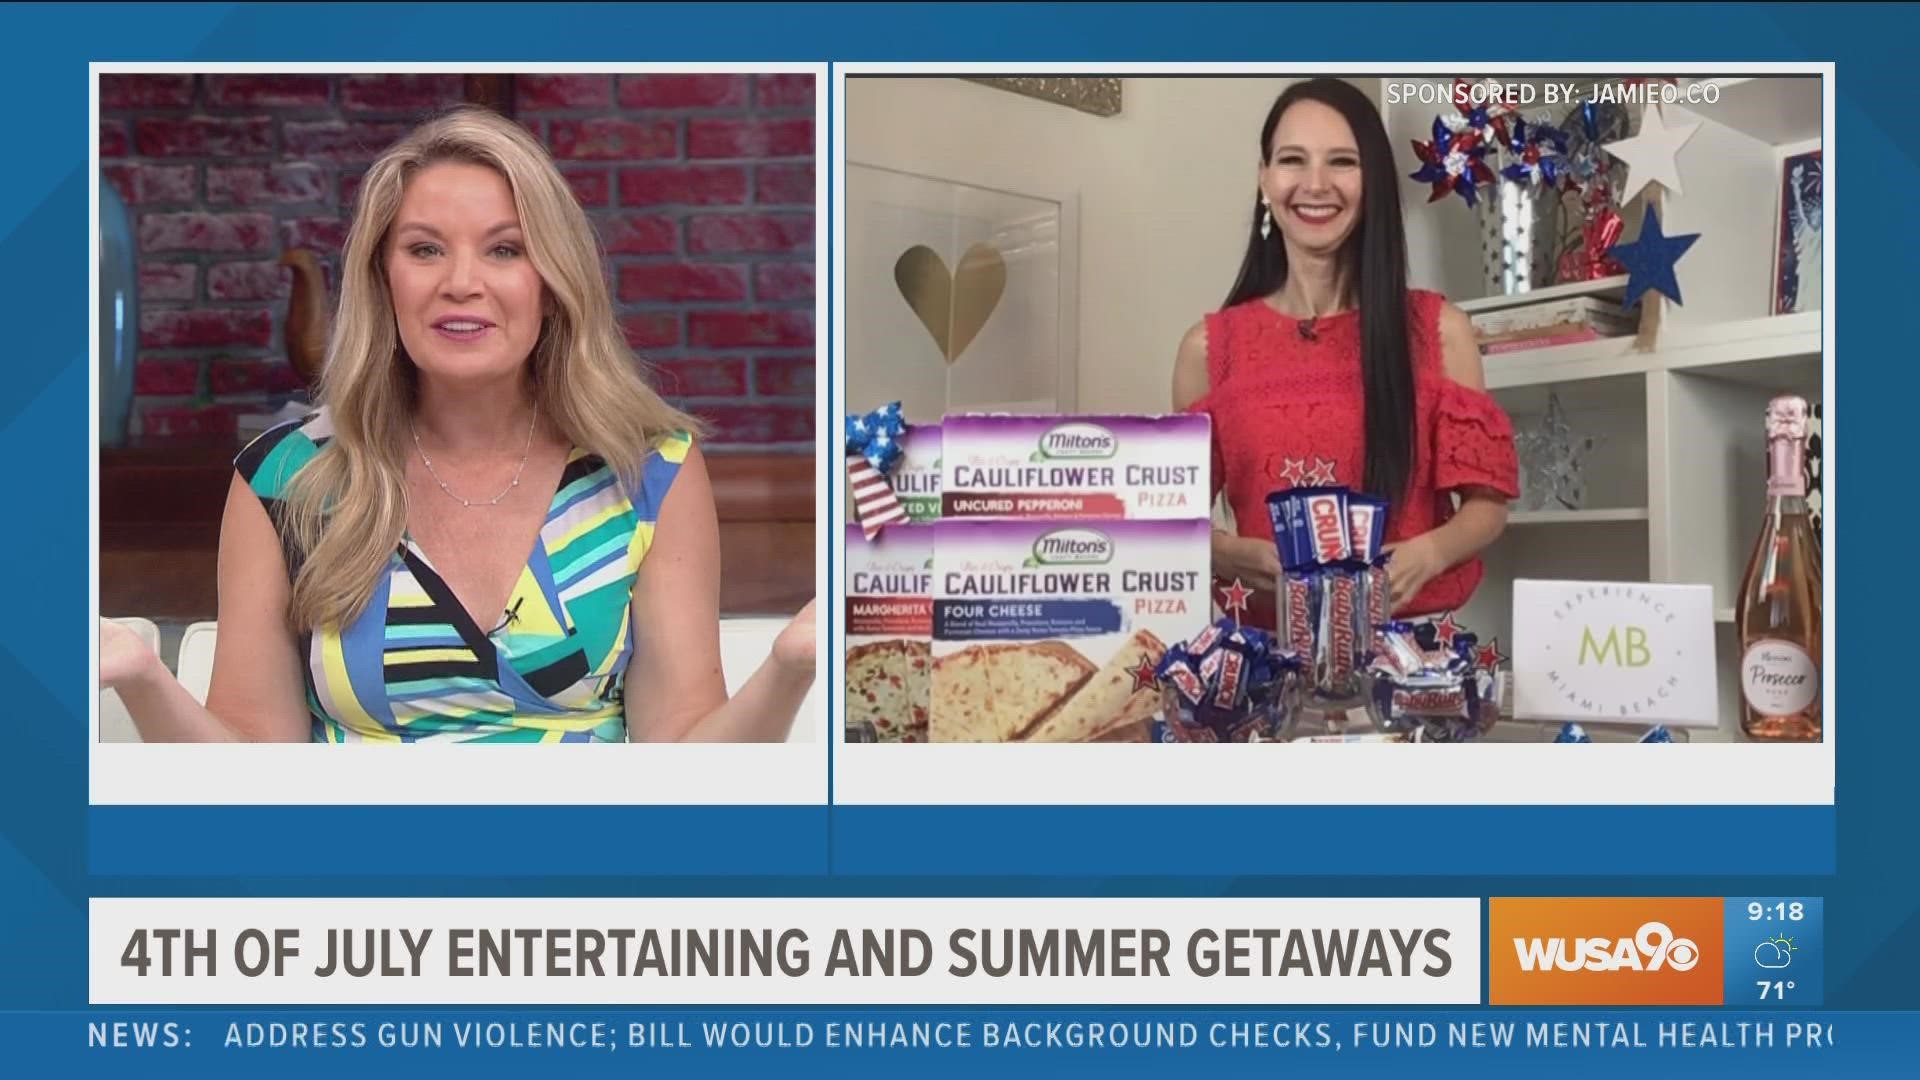 Check out these top product and travel picks for summer entertaining from lifestyle expert Jamie O'Donnell! Sponsored by Jamieo.co.